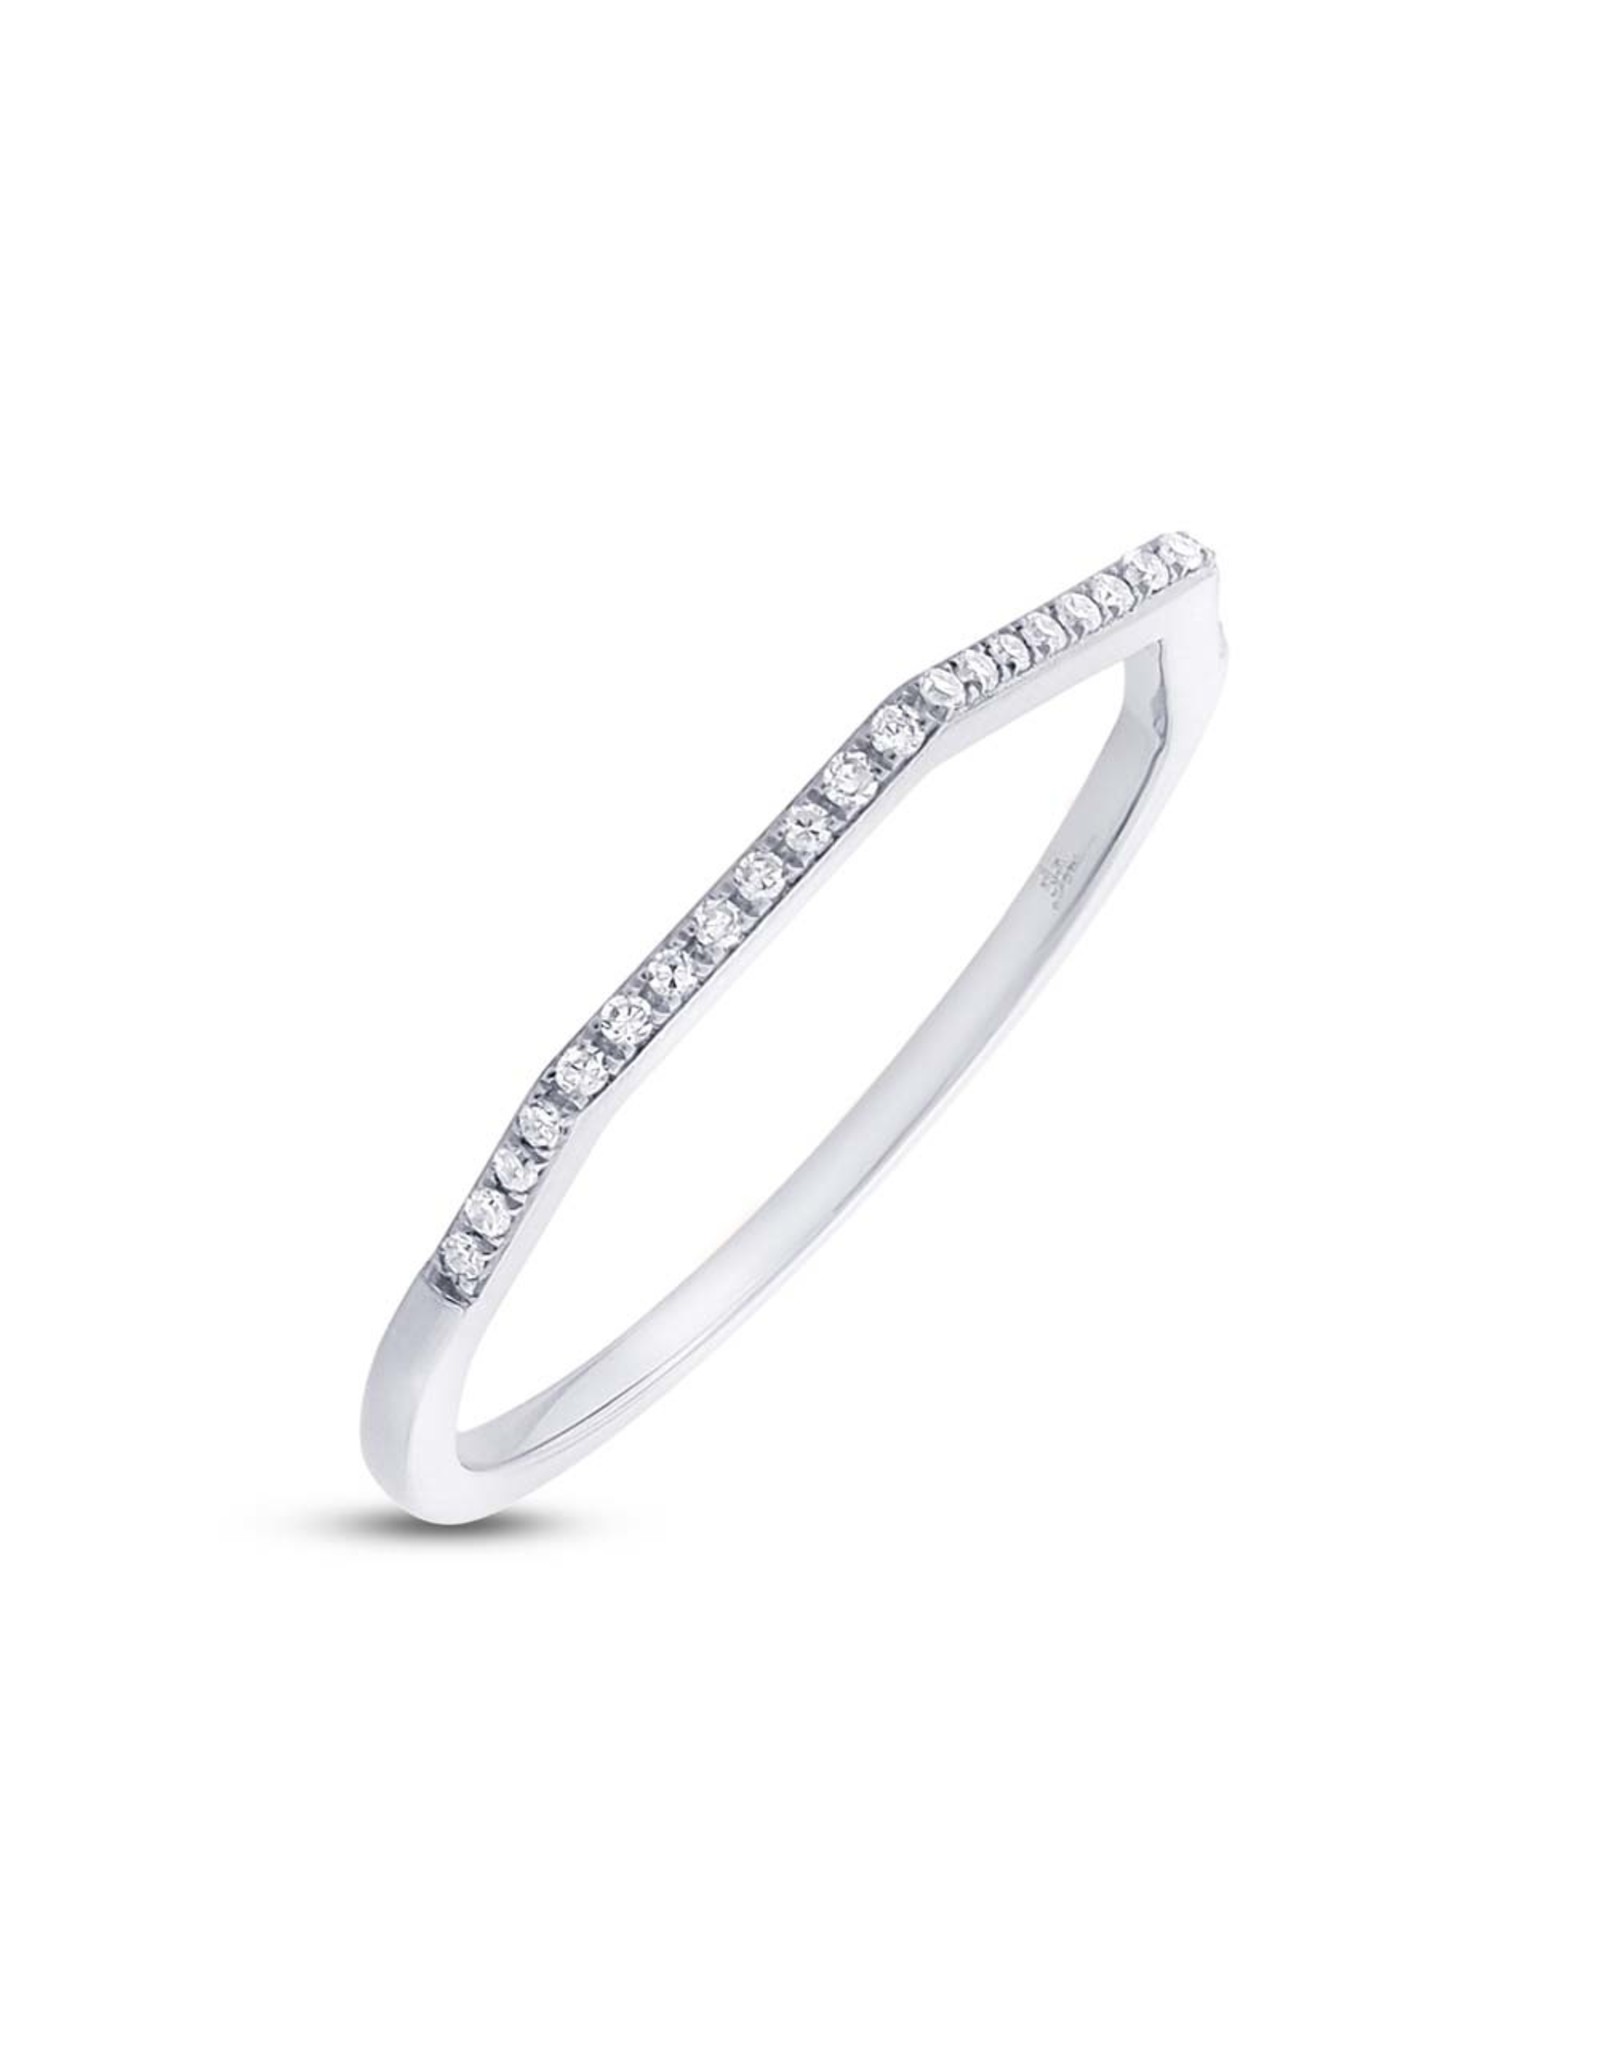 14K White Gold Essential Dainty Diamond Stackable Ring, D: 0.07ct